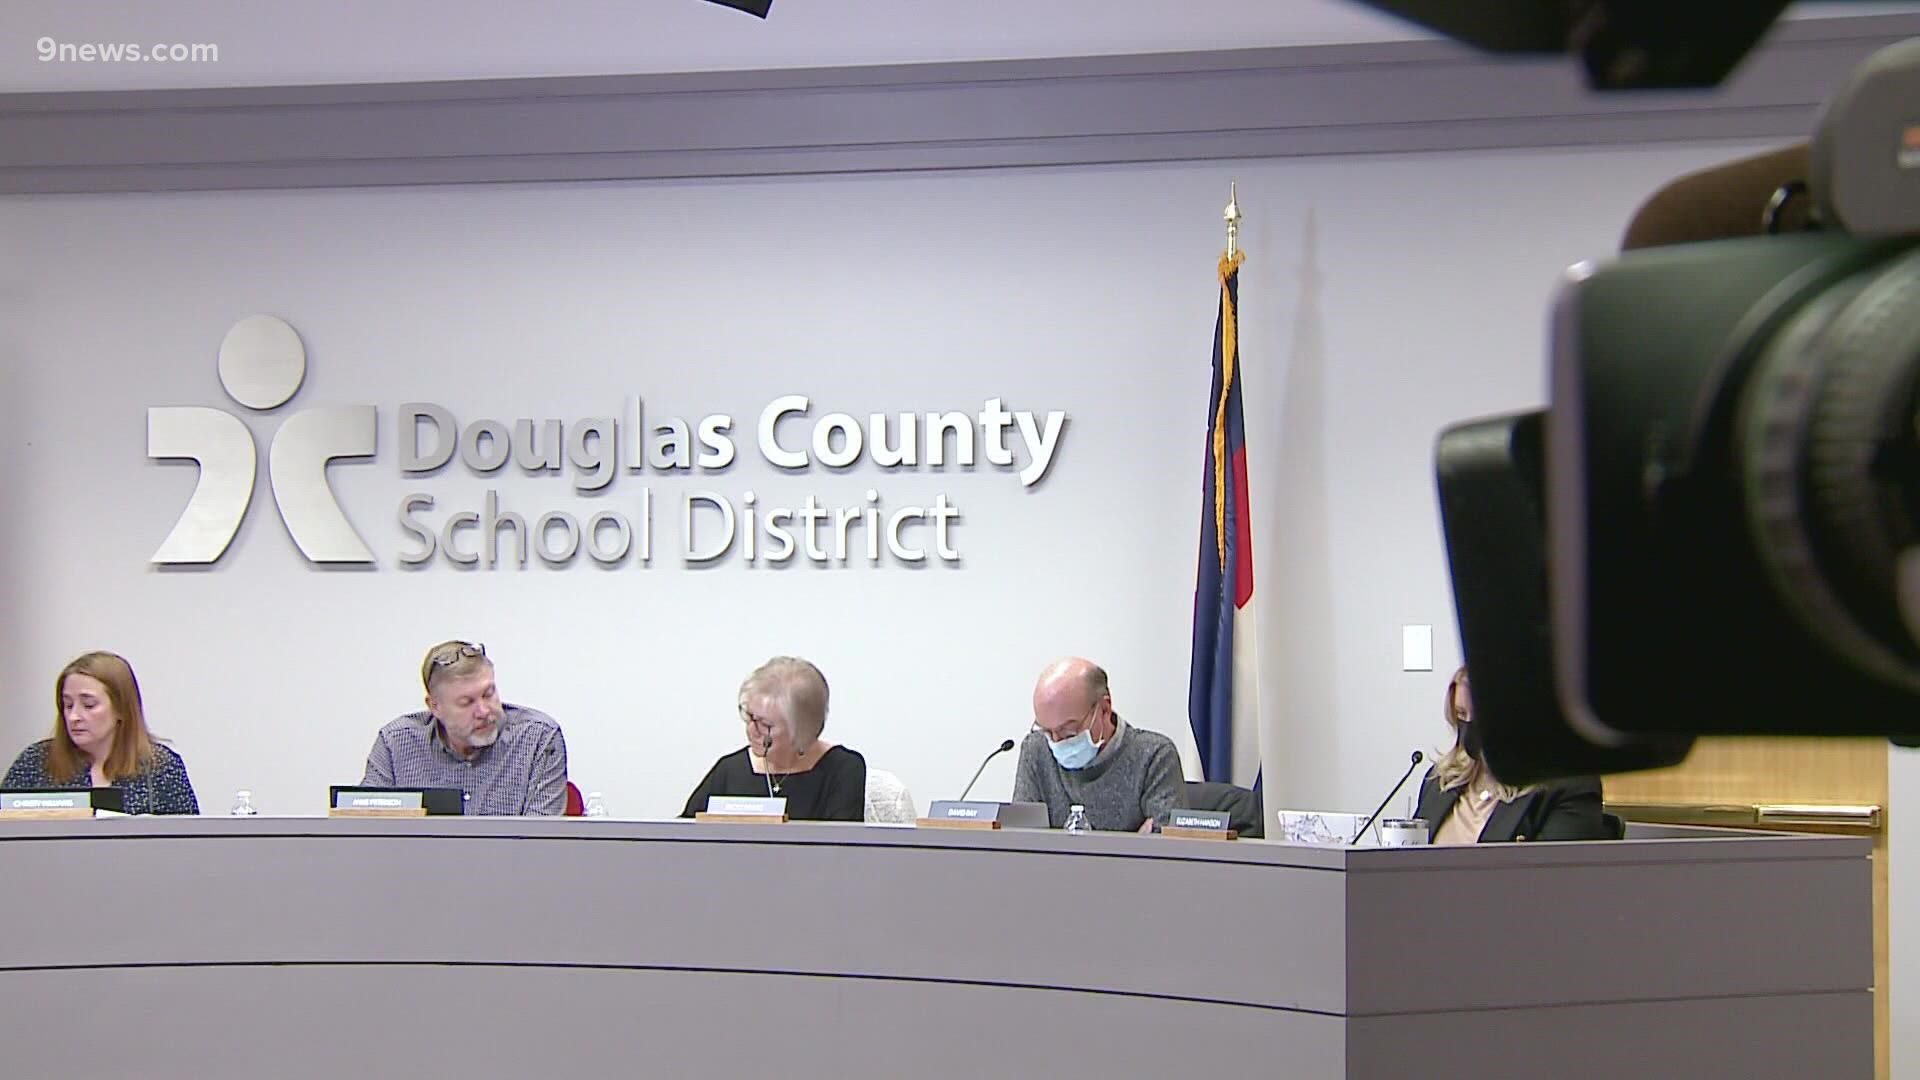 A judge issued a preliminary injunction against the board's conservative majority, saying evidence suggests they decided privately to fire the superintendent.